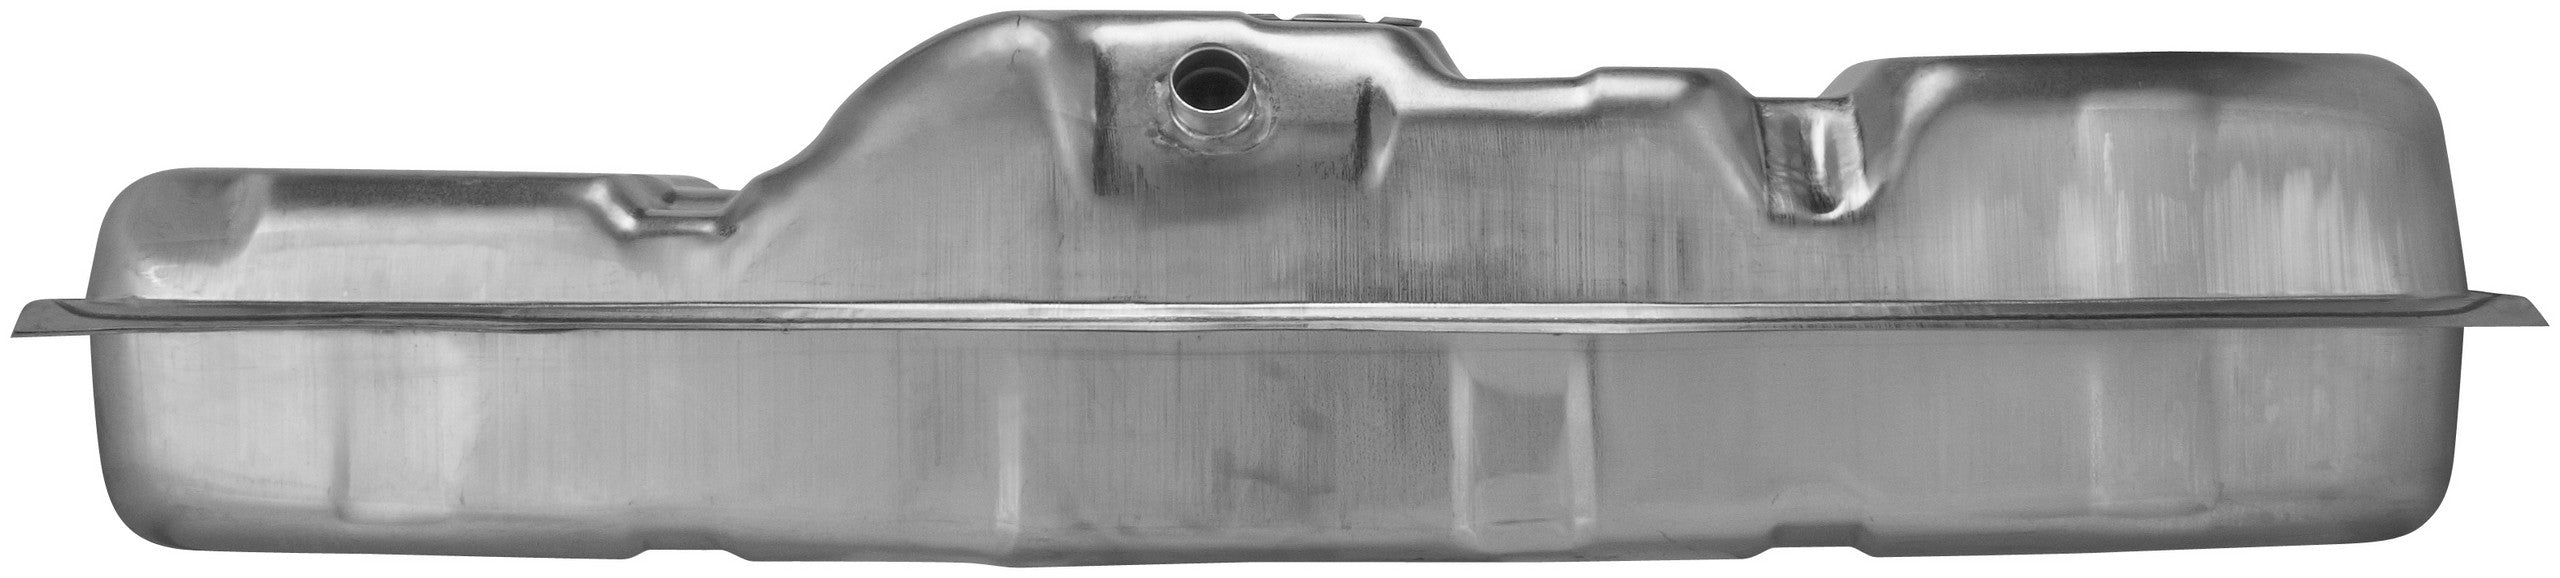 Fuel Tank for GMC C2500 GAS 2000 1999 1998 1997 1996 1995 1994 1993 1992 1991 1990 1989 1988 - Spectra GM22B